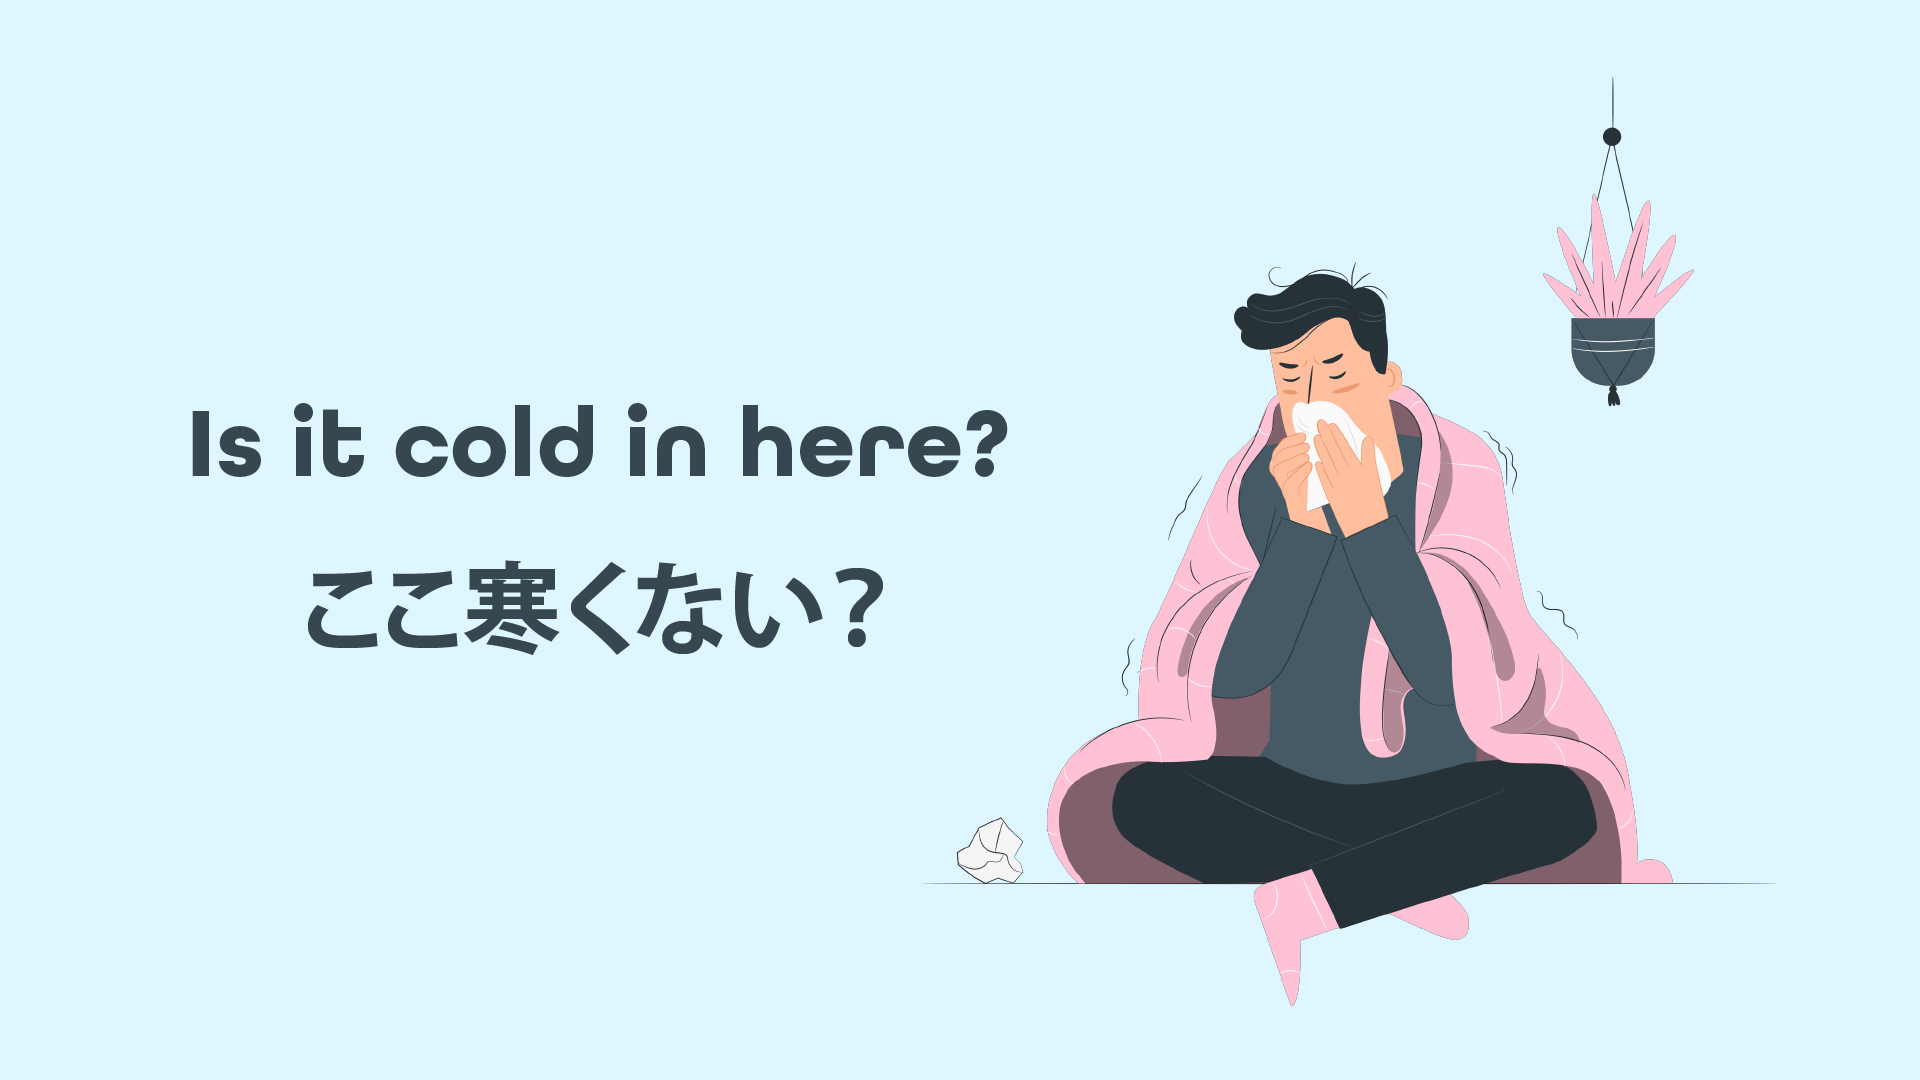  Is it cold in here? ここ寒くない？